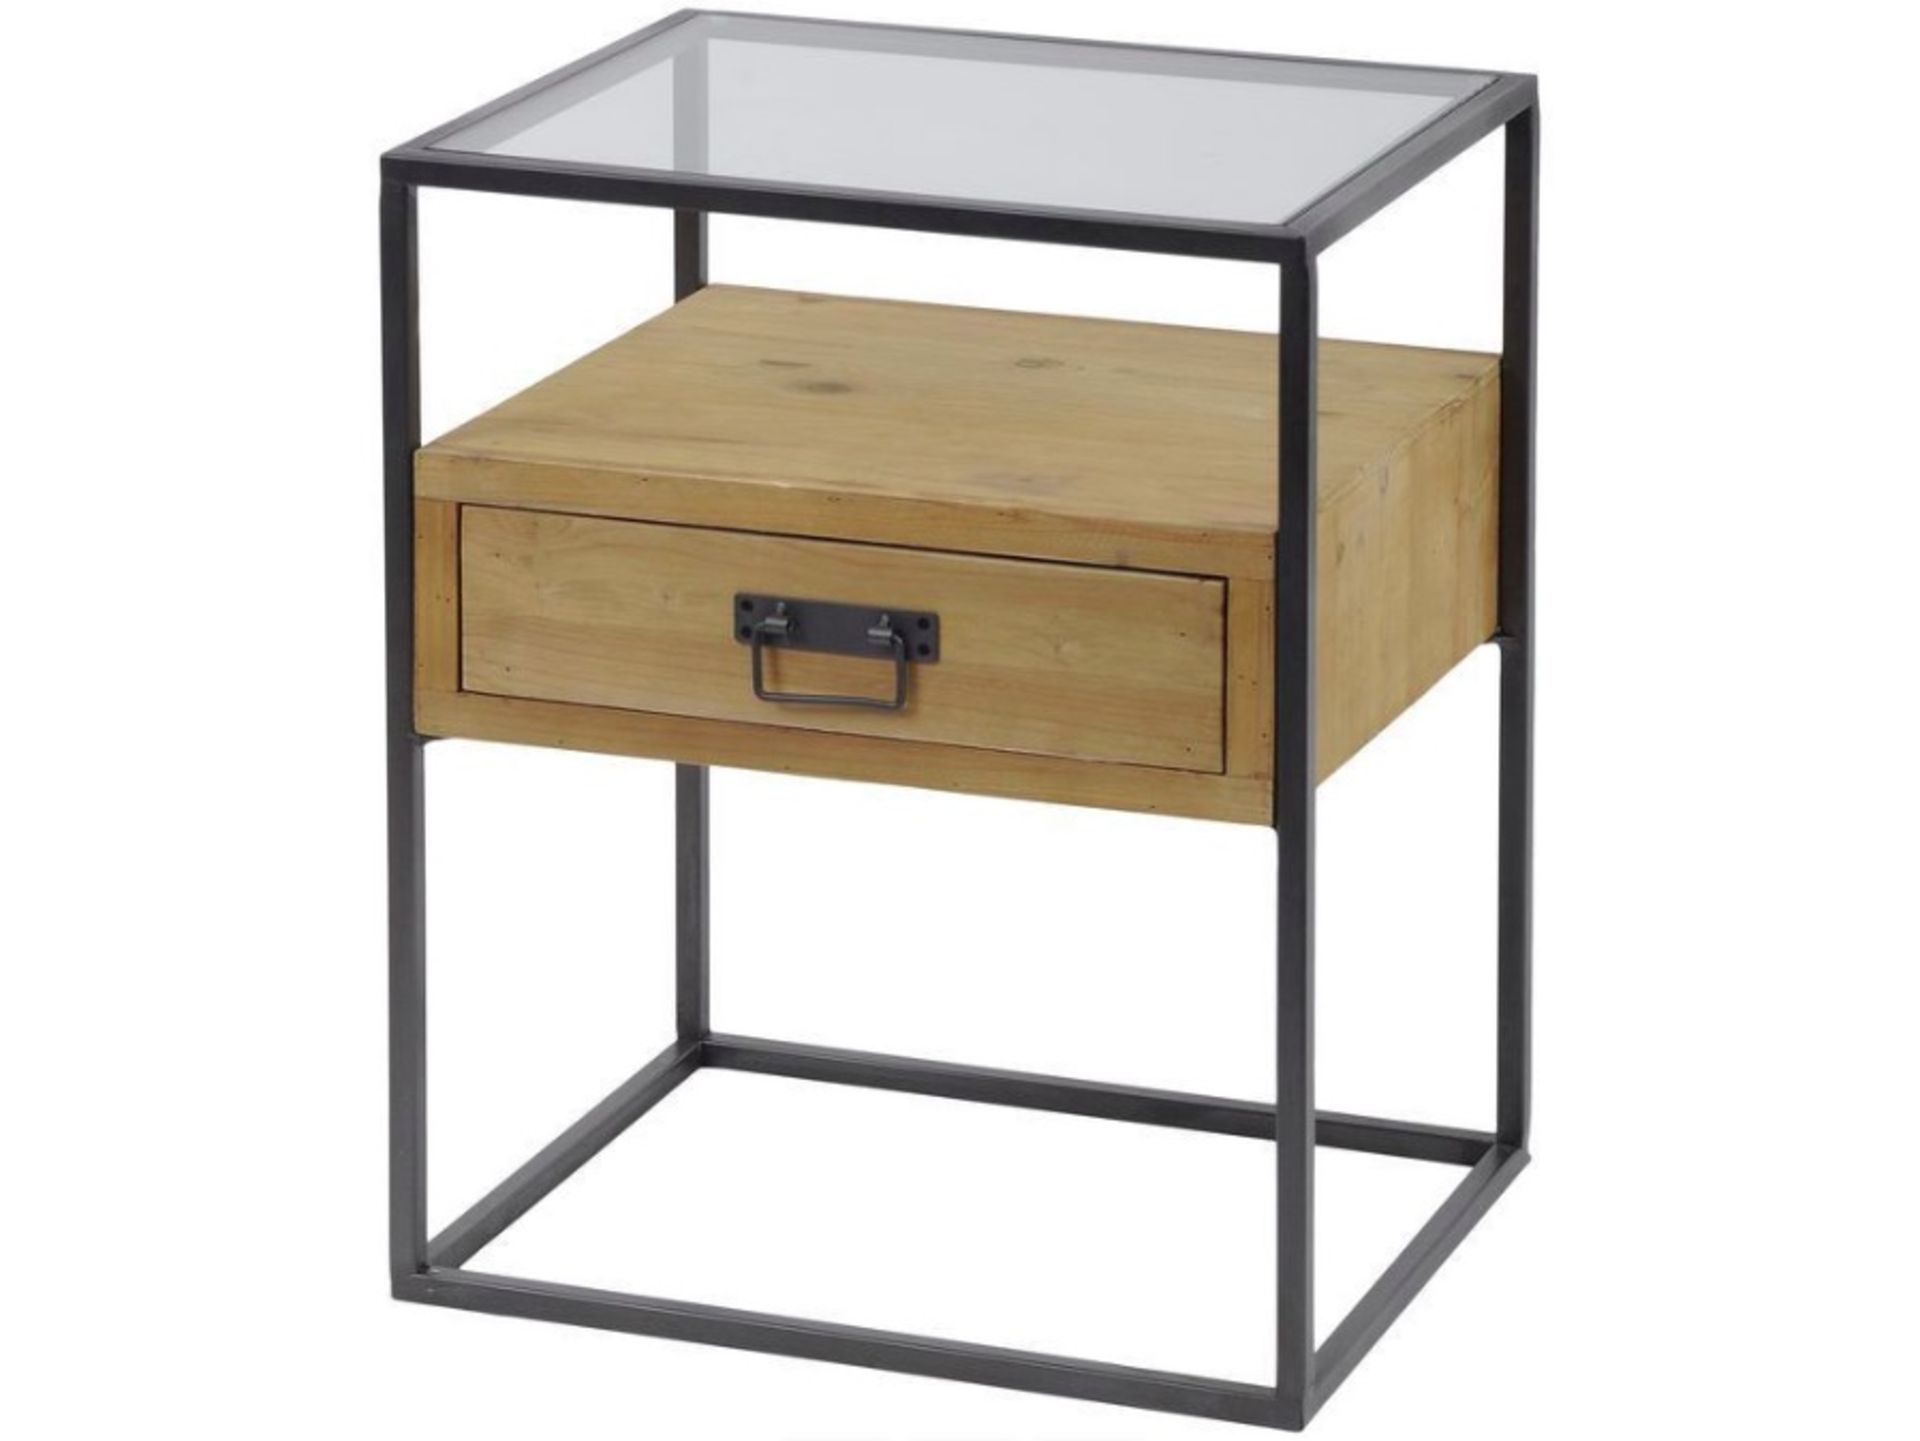 Kempsey Glass Top Drawer Side Table This modern, cubic design drawer table gives urban-style